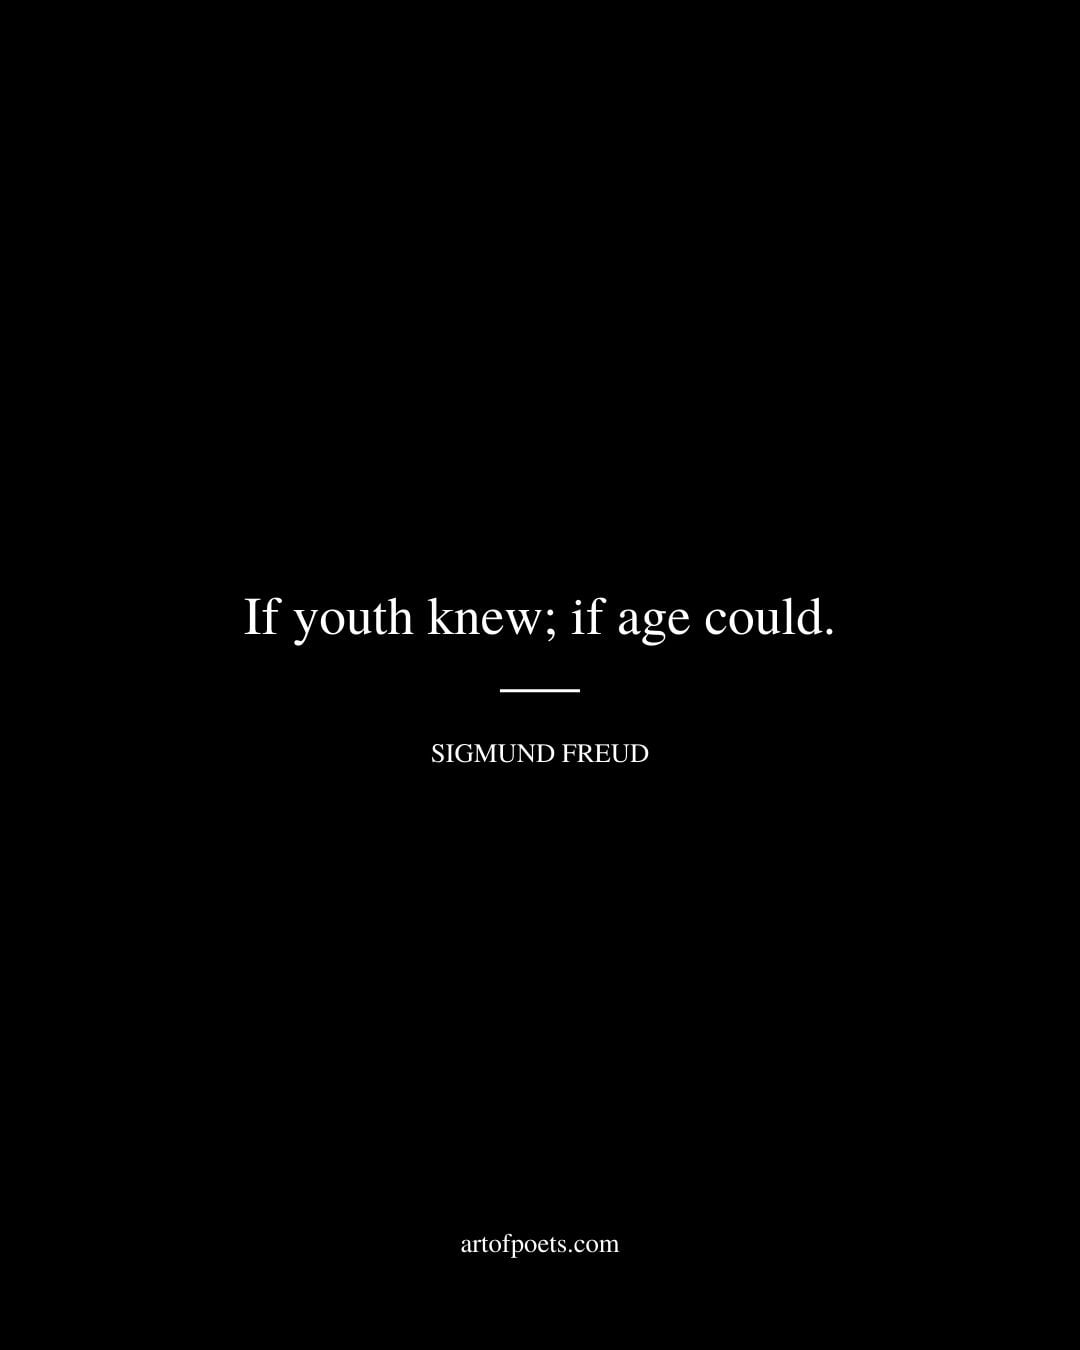 If youth knew if age could